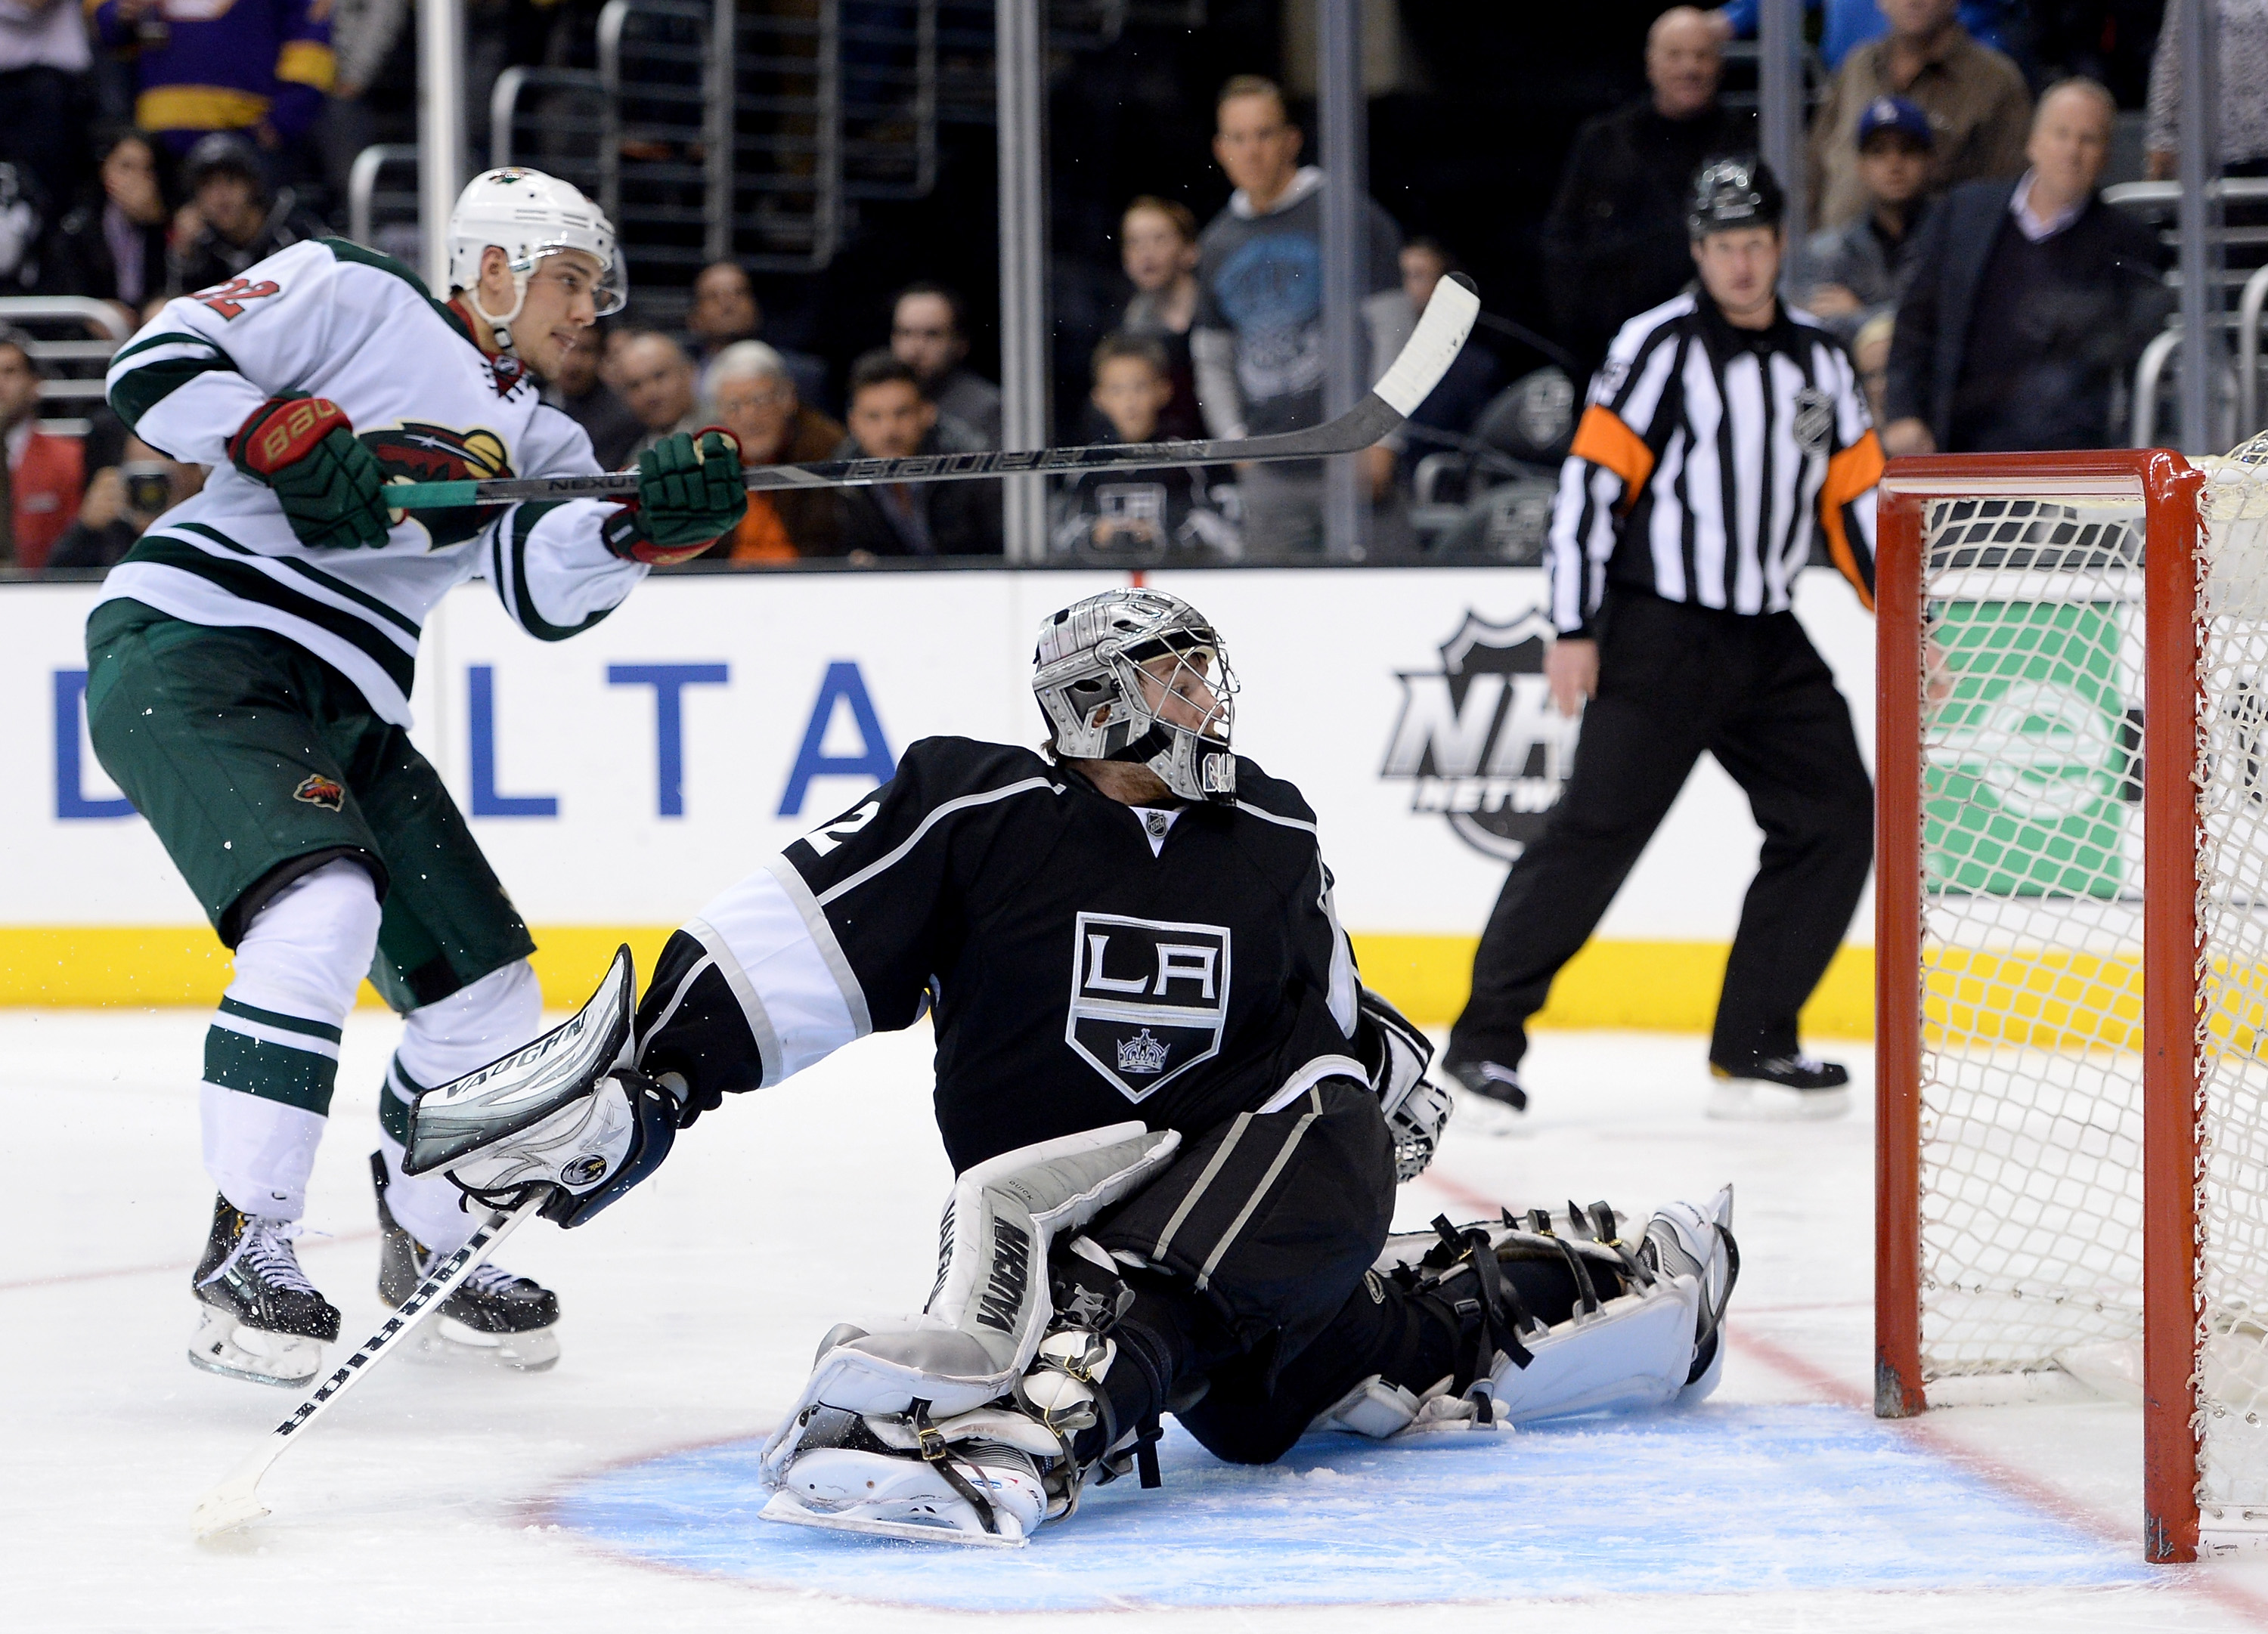 Jonathan Quick #32 of the Los Angeles Kings is spun around by Nino Niederreiter #22 of the Minnesota Wild who scores for a 2-1 win during sudden death shootout at Staples Center on January 7, 2014 in Los Angeles, California. (credit: Harry How/Getty Images) 